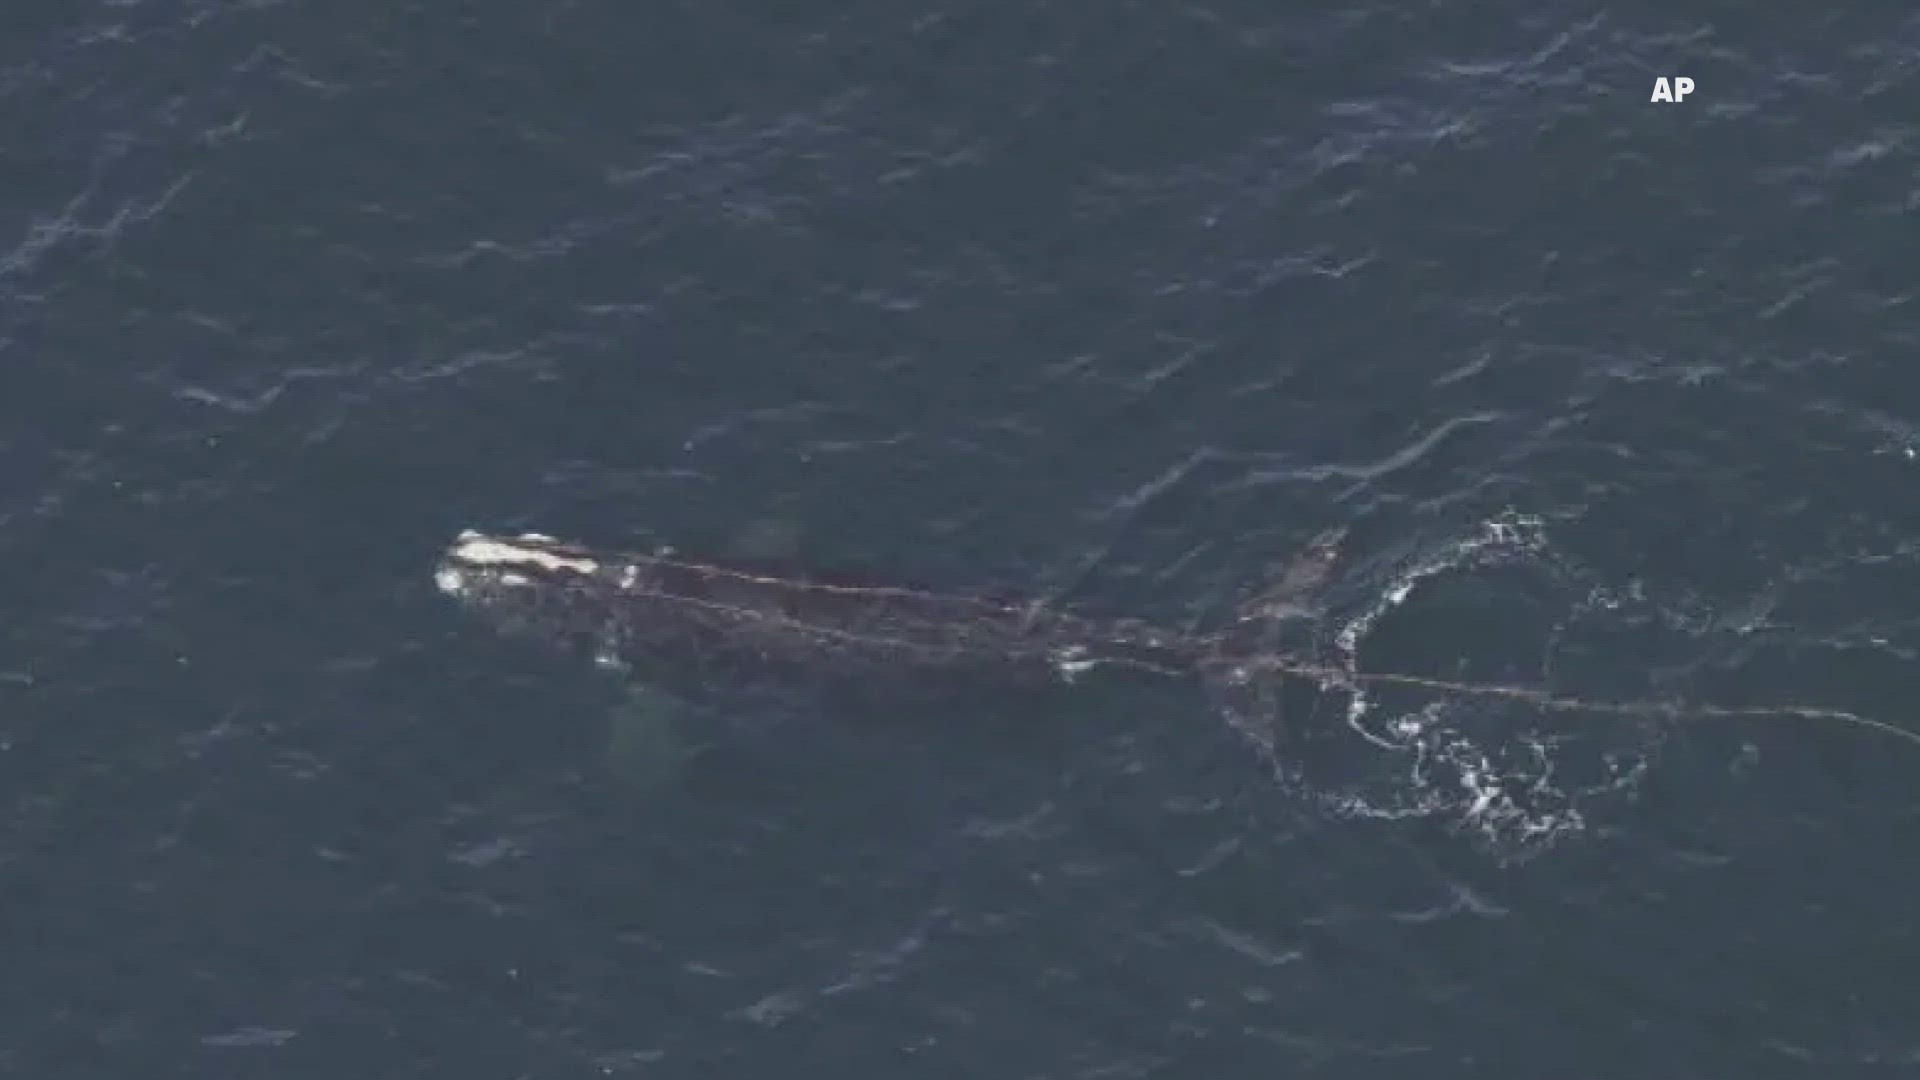 The entangled whale was seen Tuesday about 50 miles south of Rhode Island's Block Island, the National Oceanic and Atmospheric Administration said.